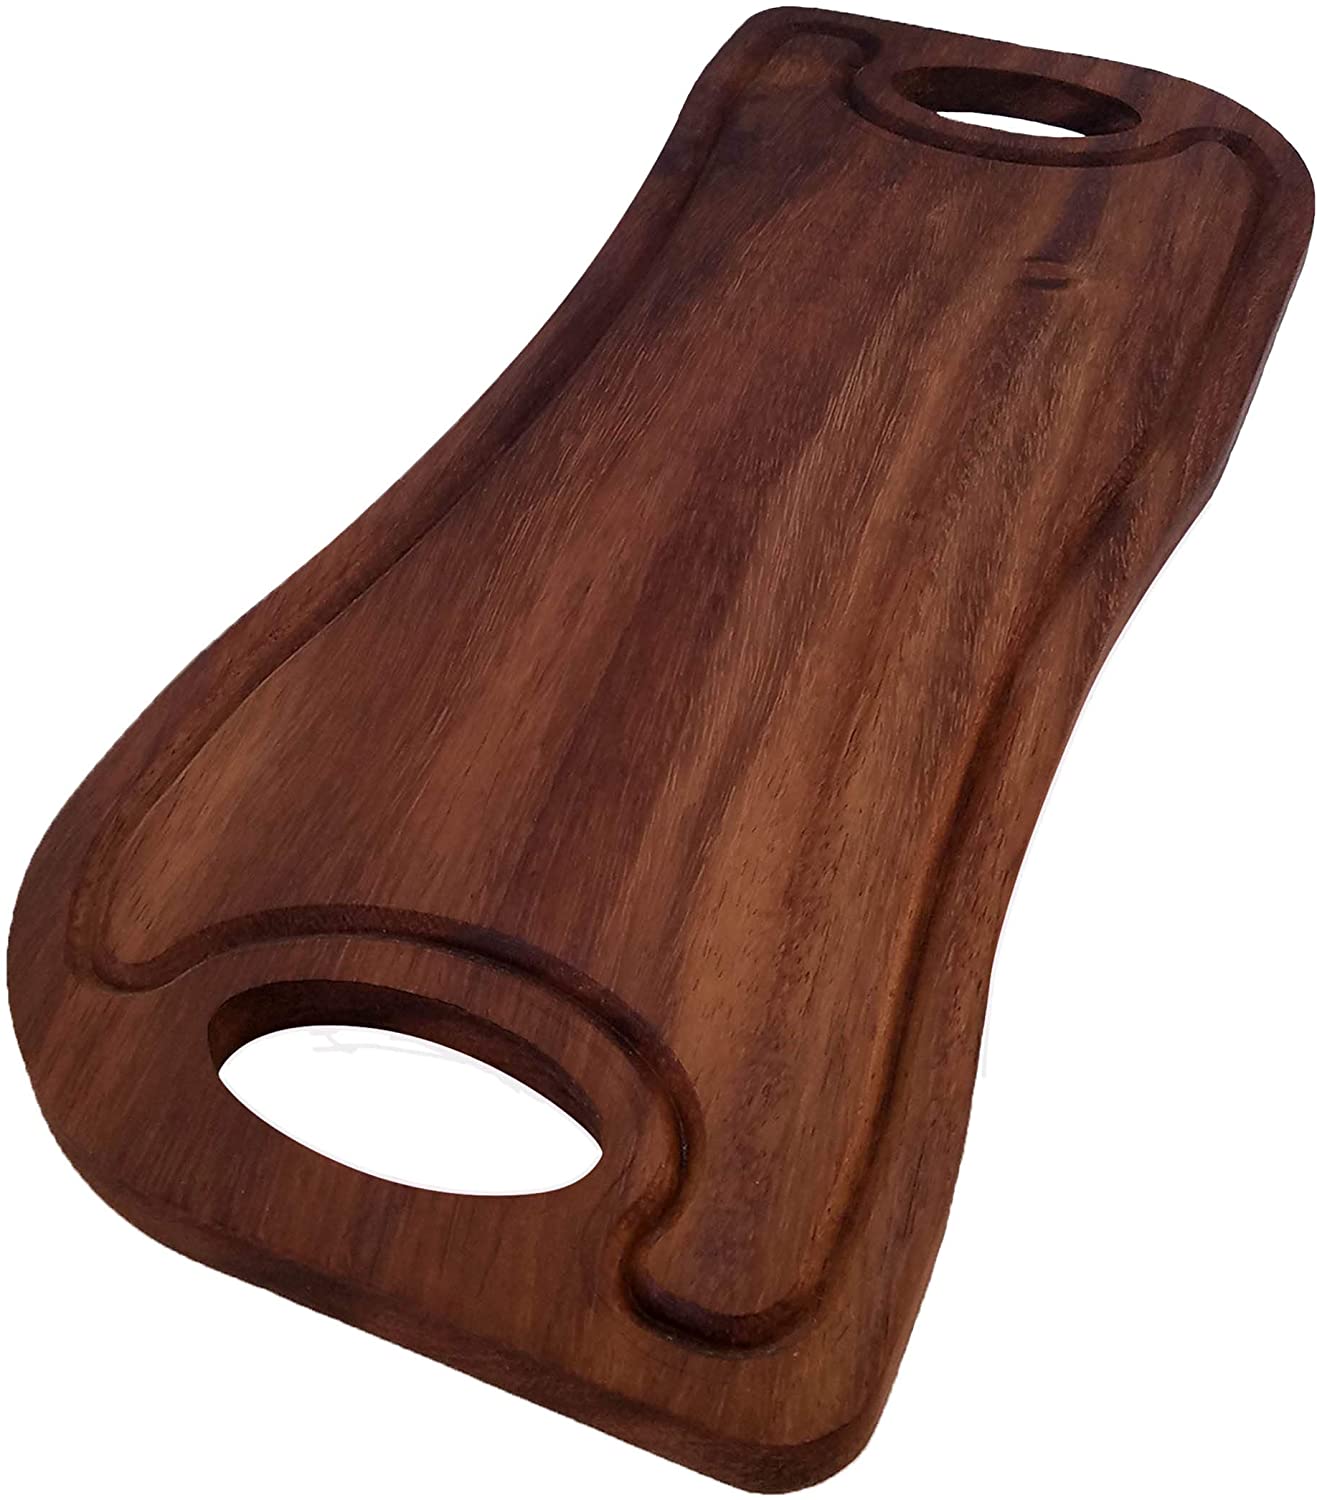 PAROTA WOOD PRODUCTS / Large Parota Wood Serving/Cutting Board with Juice Groove